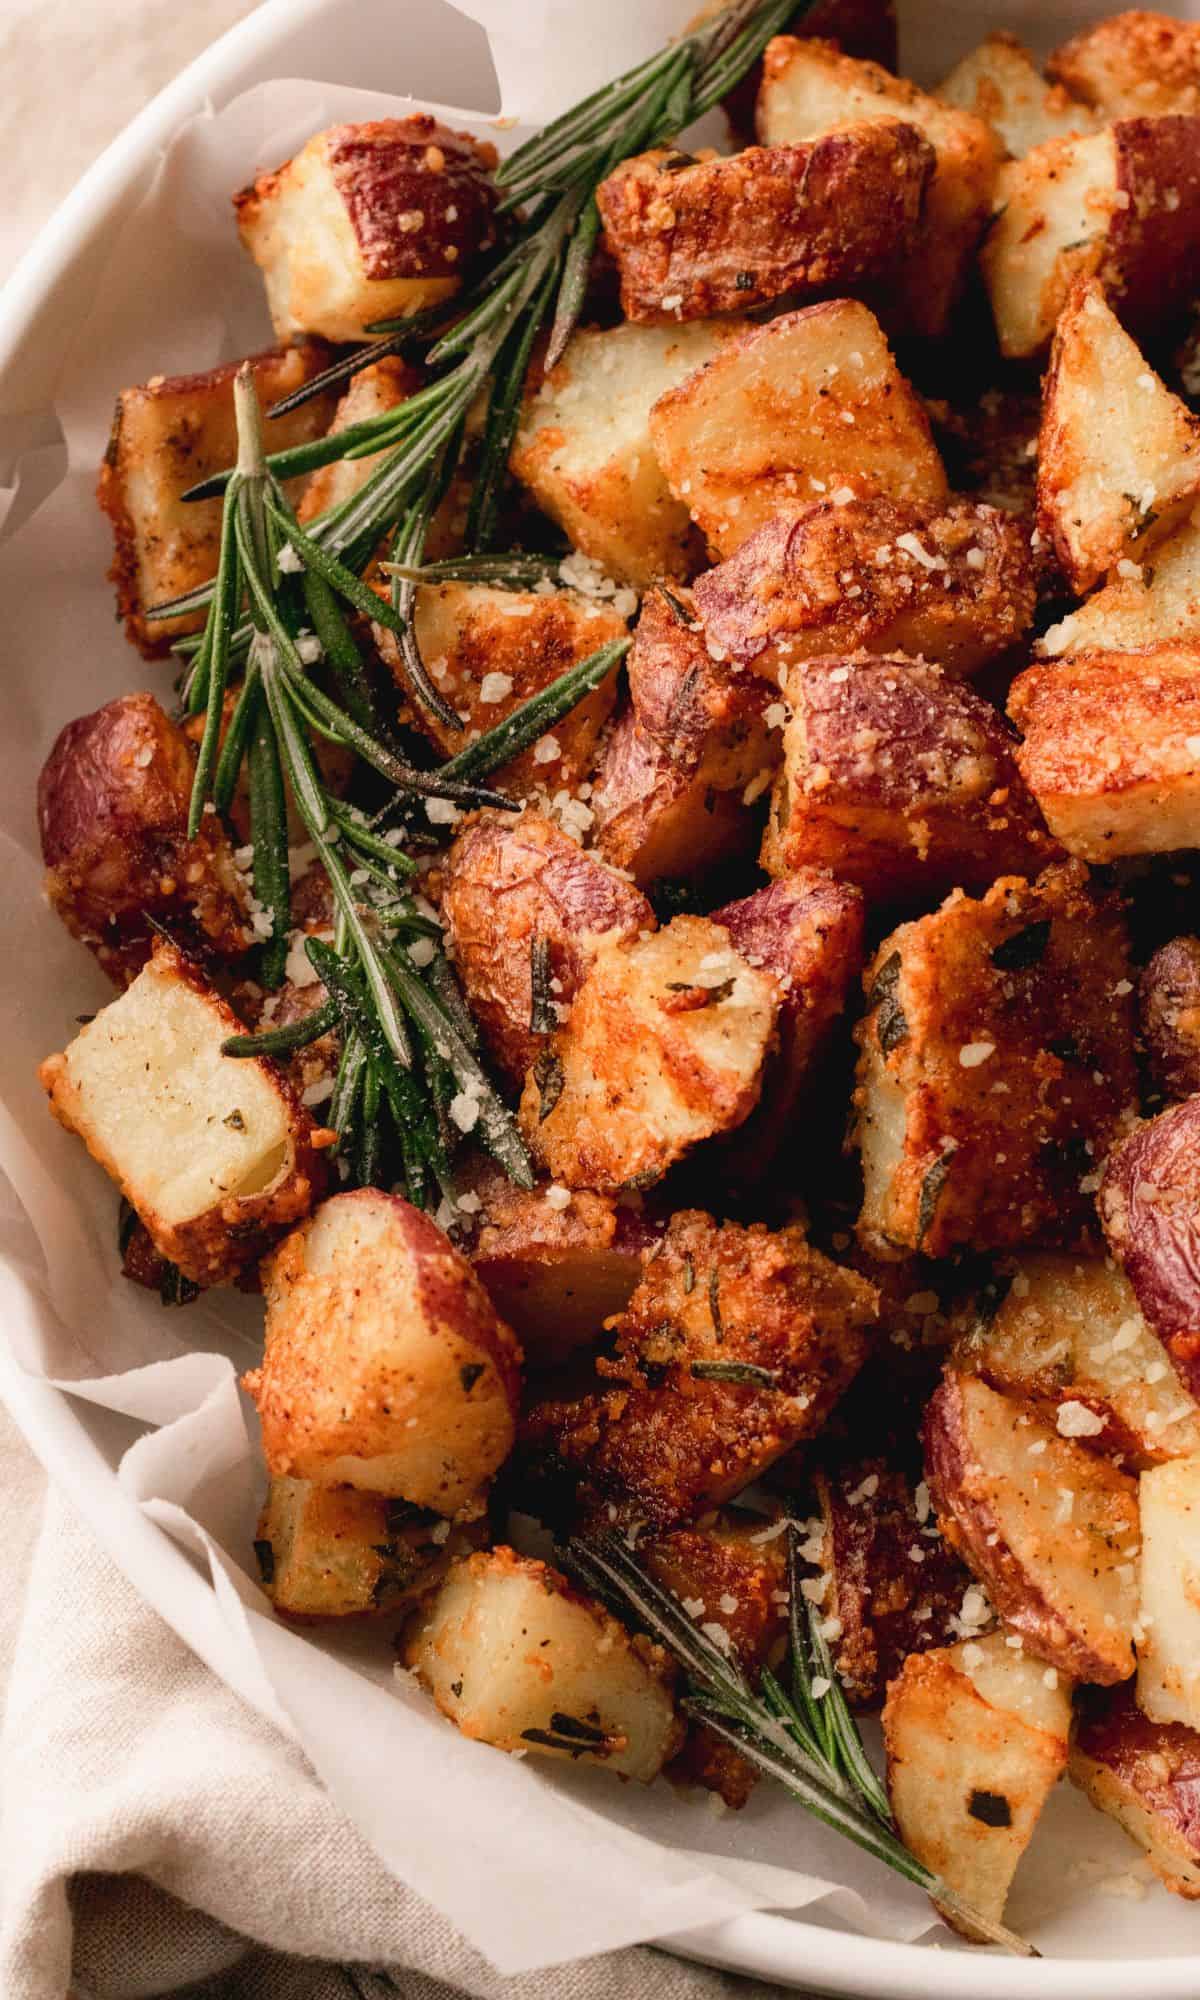 Roasted red potatoes in a white bowl.